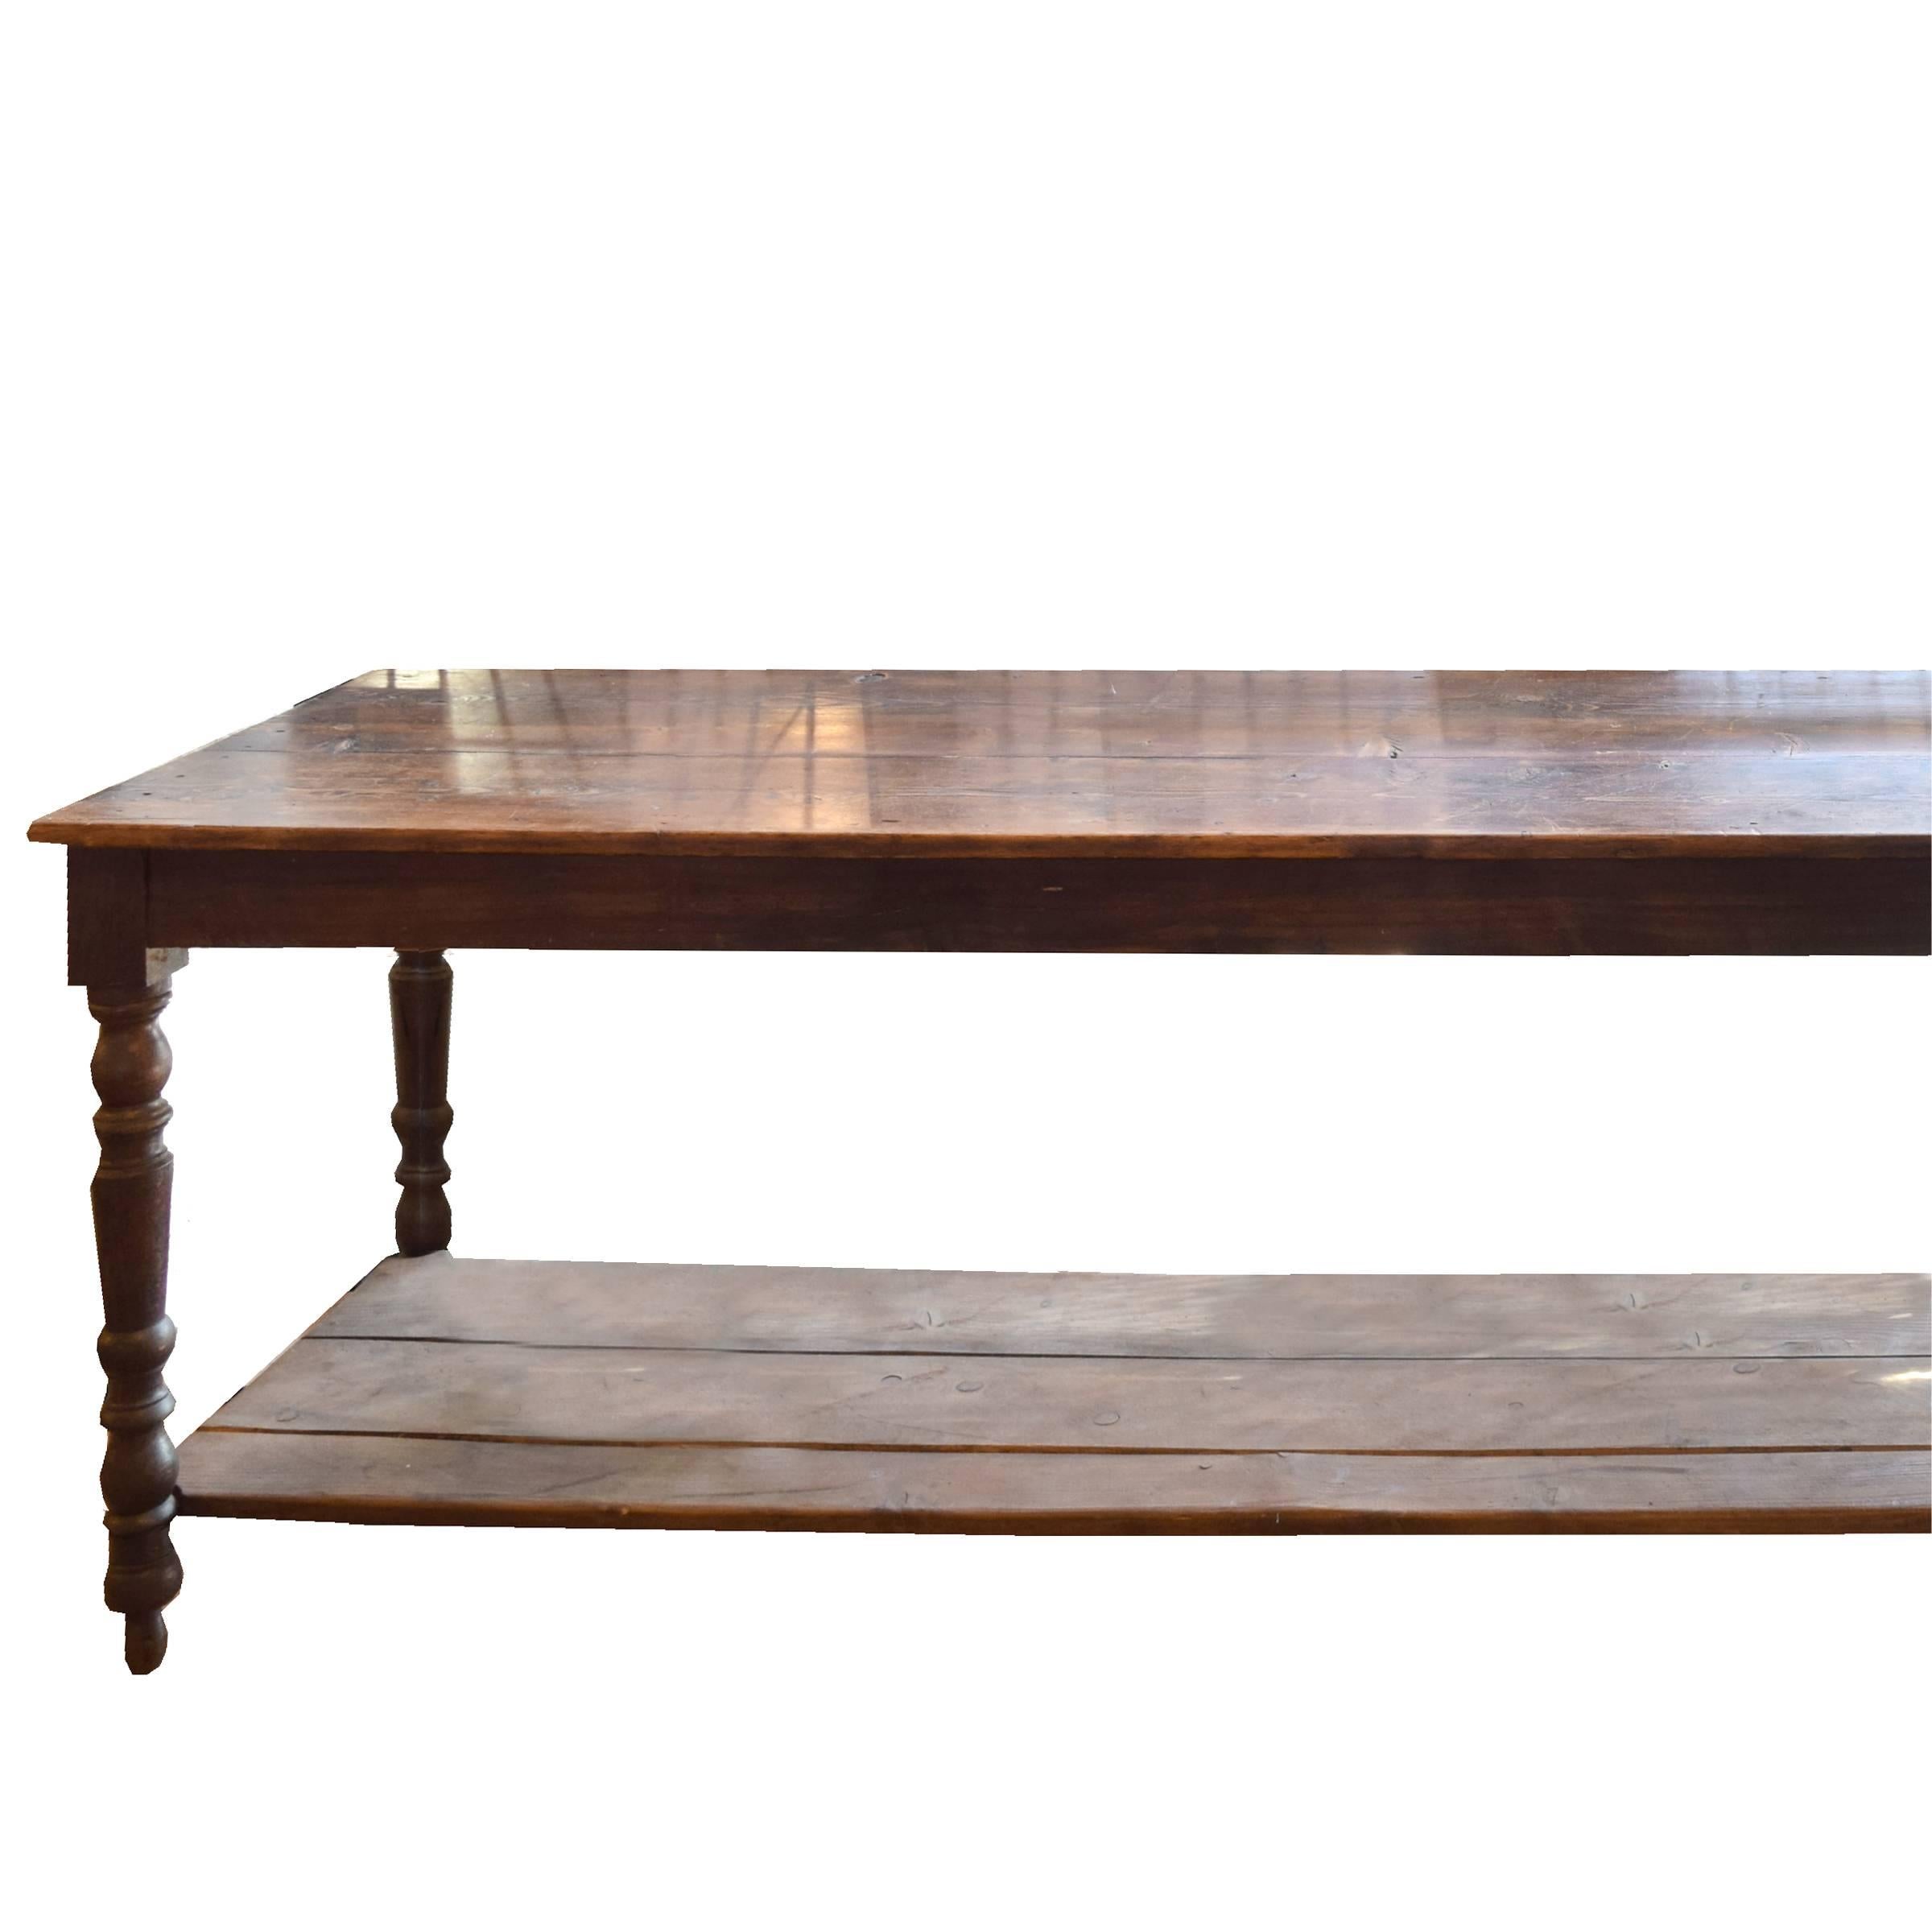 A fantastic monumental French wood draper's table with a low shelf and six turned legs, circa 1900.